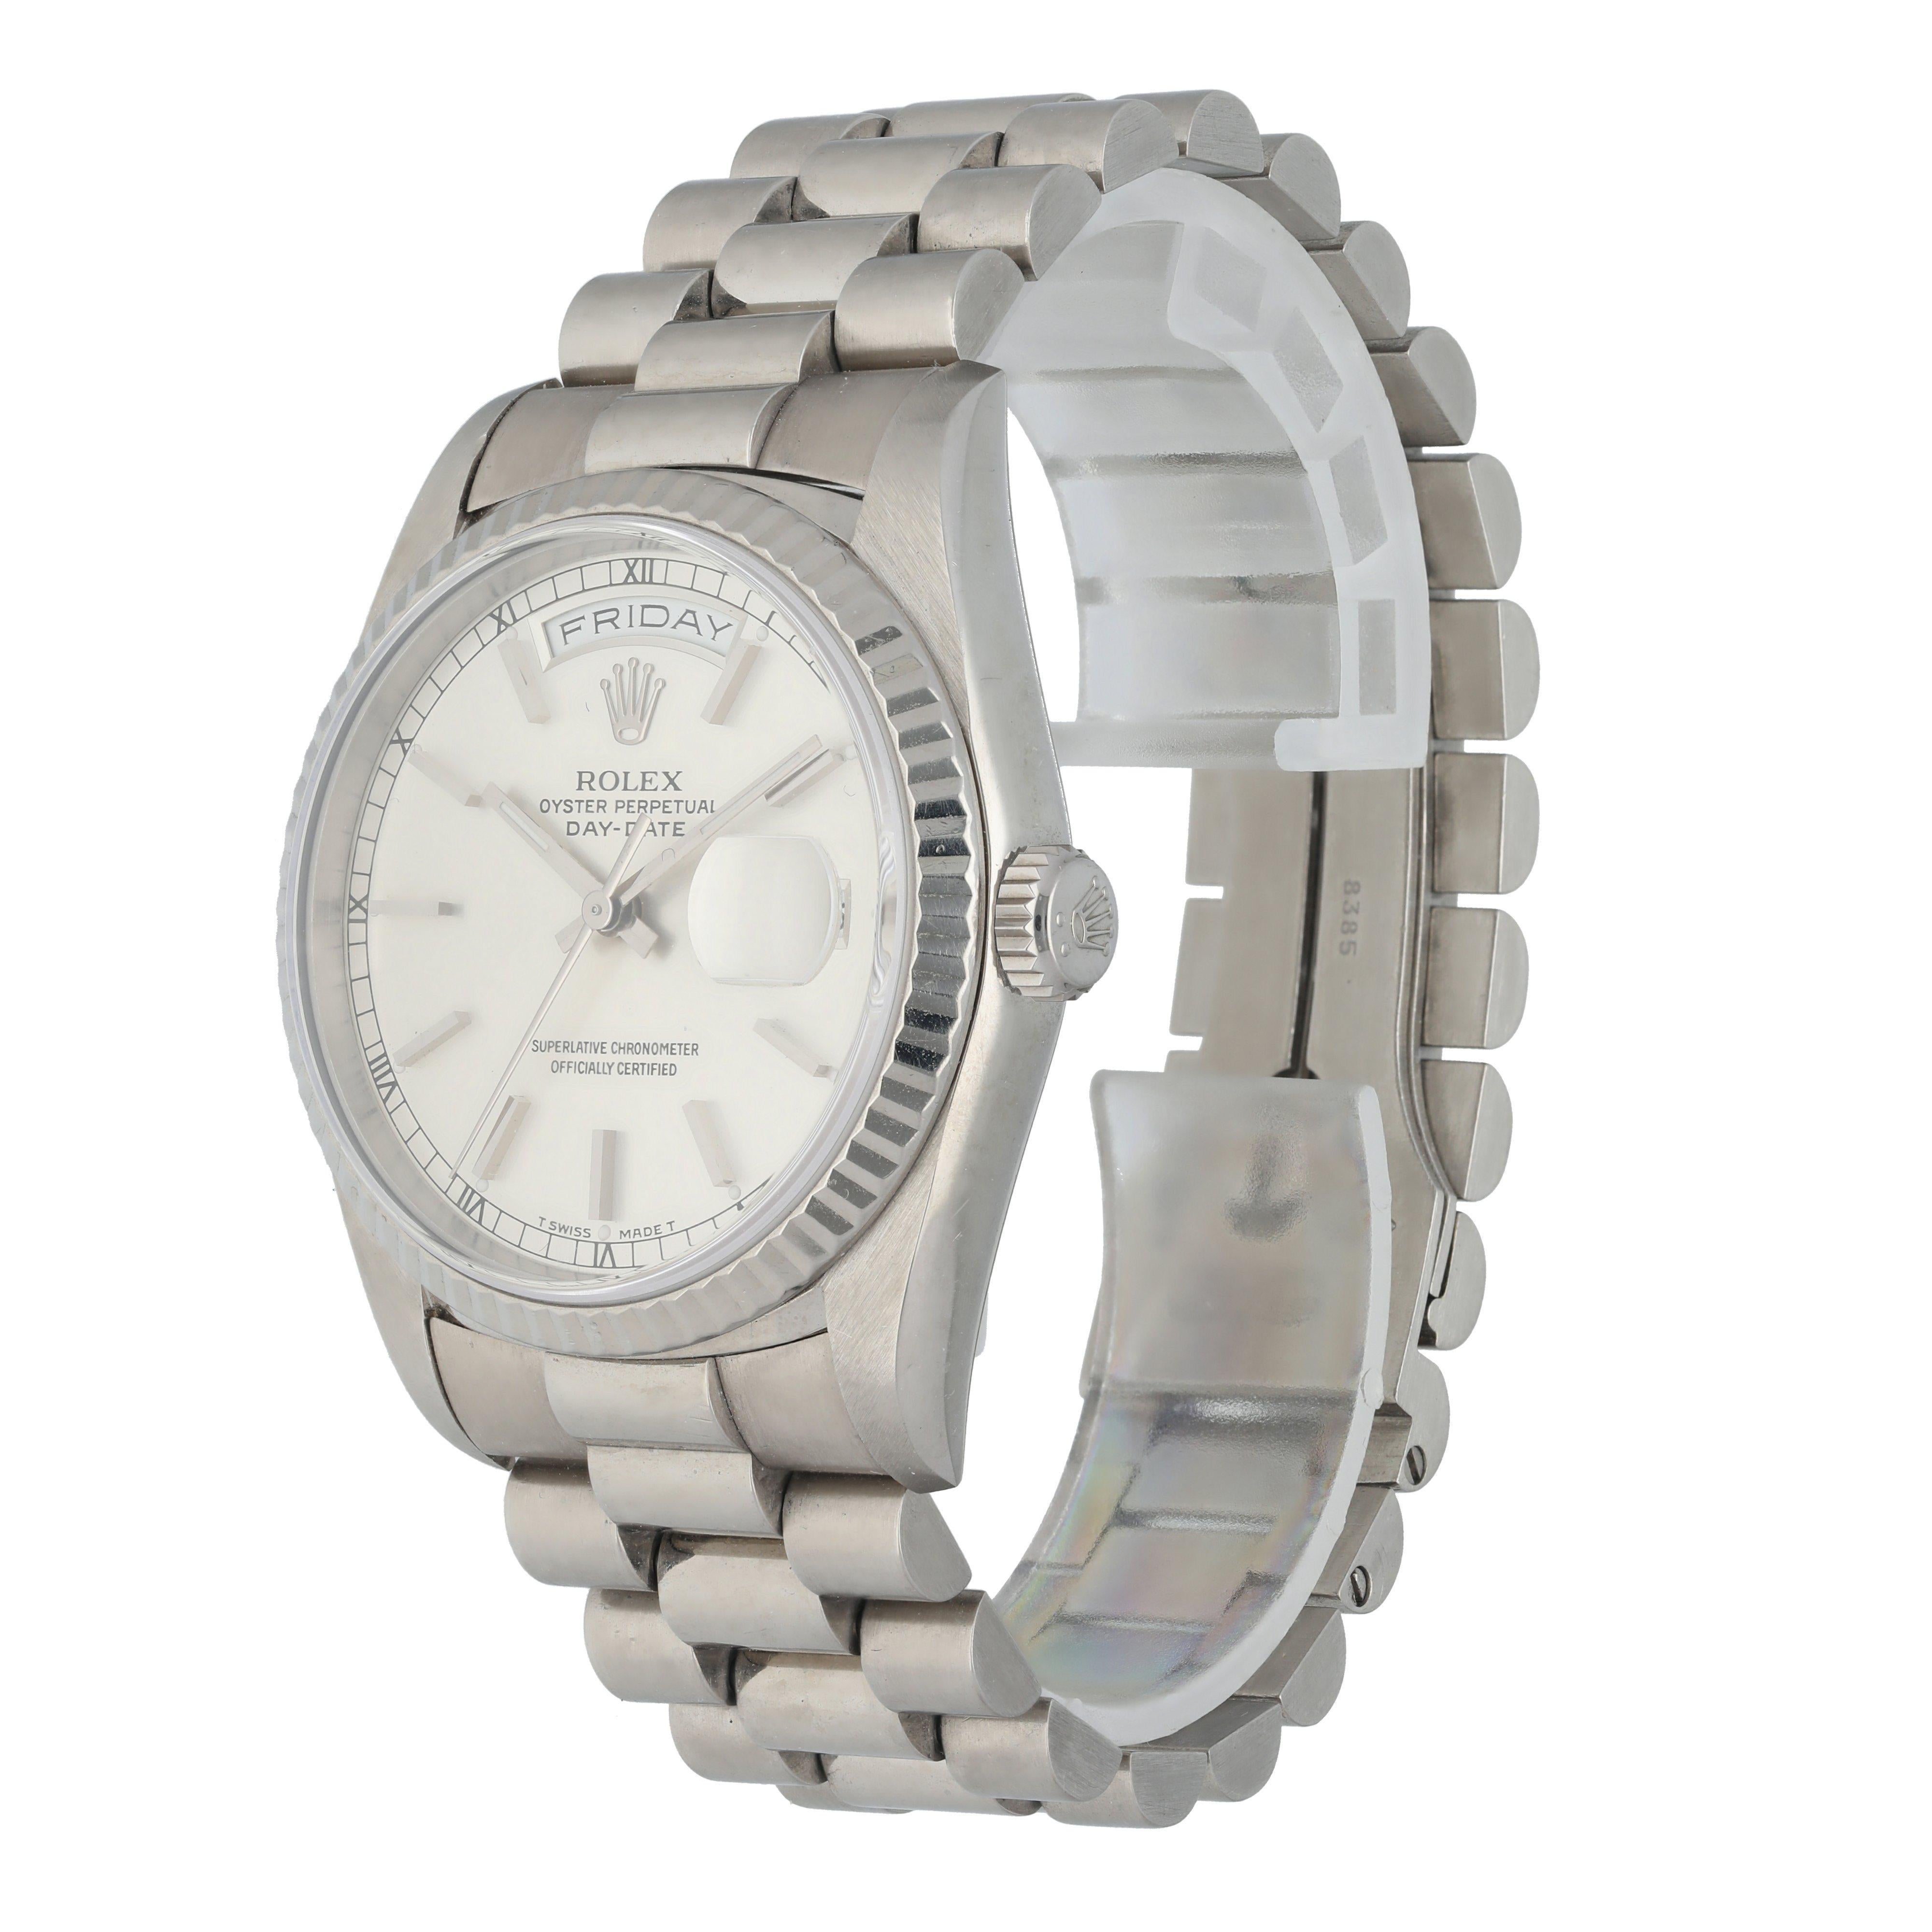 Rolex Day-Date 18239 Men's Watch.
36mm 18K White Gold case. 
White Gold fluted bezel. 
Grey dial with Roman numeral hour markers.
Minute markers on the outer dial. 
Date display at the 3 o'clock position. 
White Gold Bracelet with Fold Over Clasp.